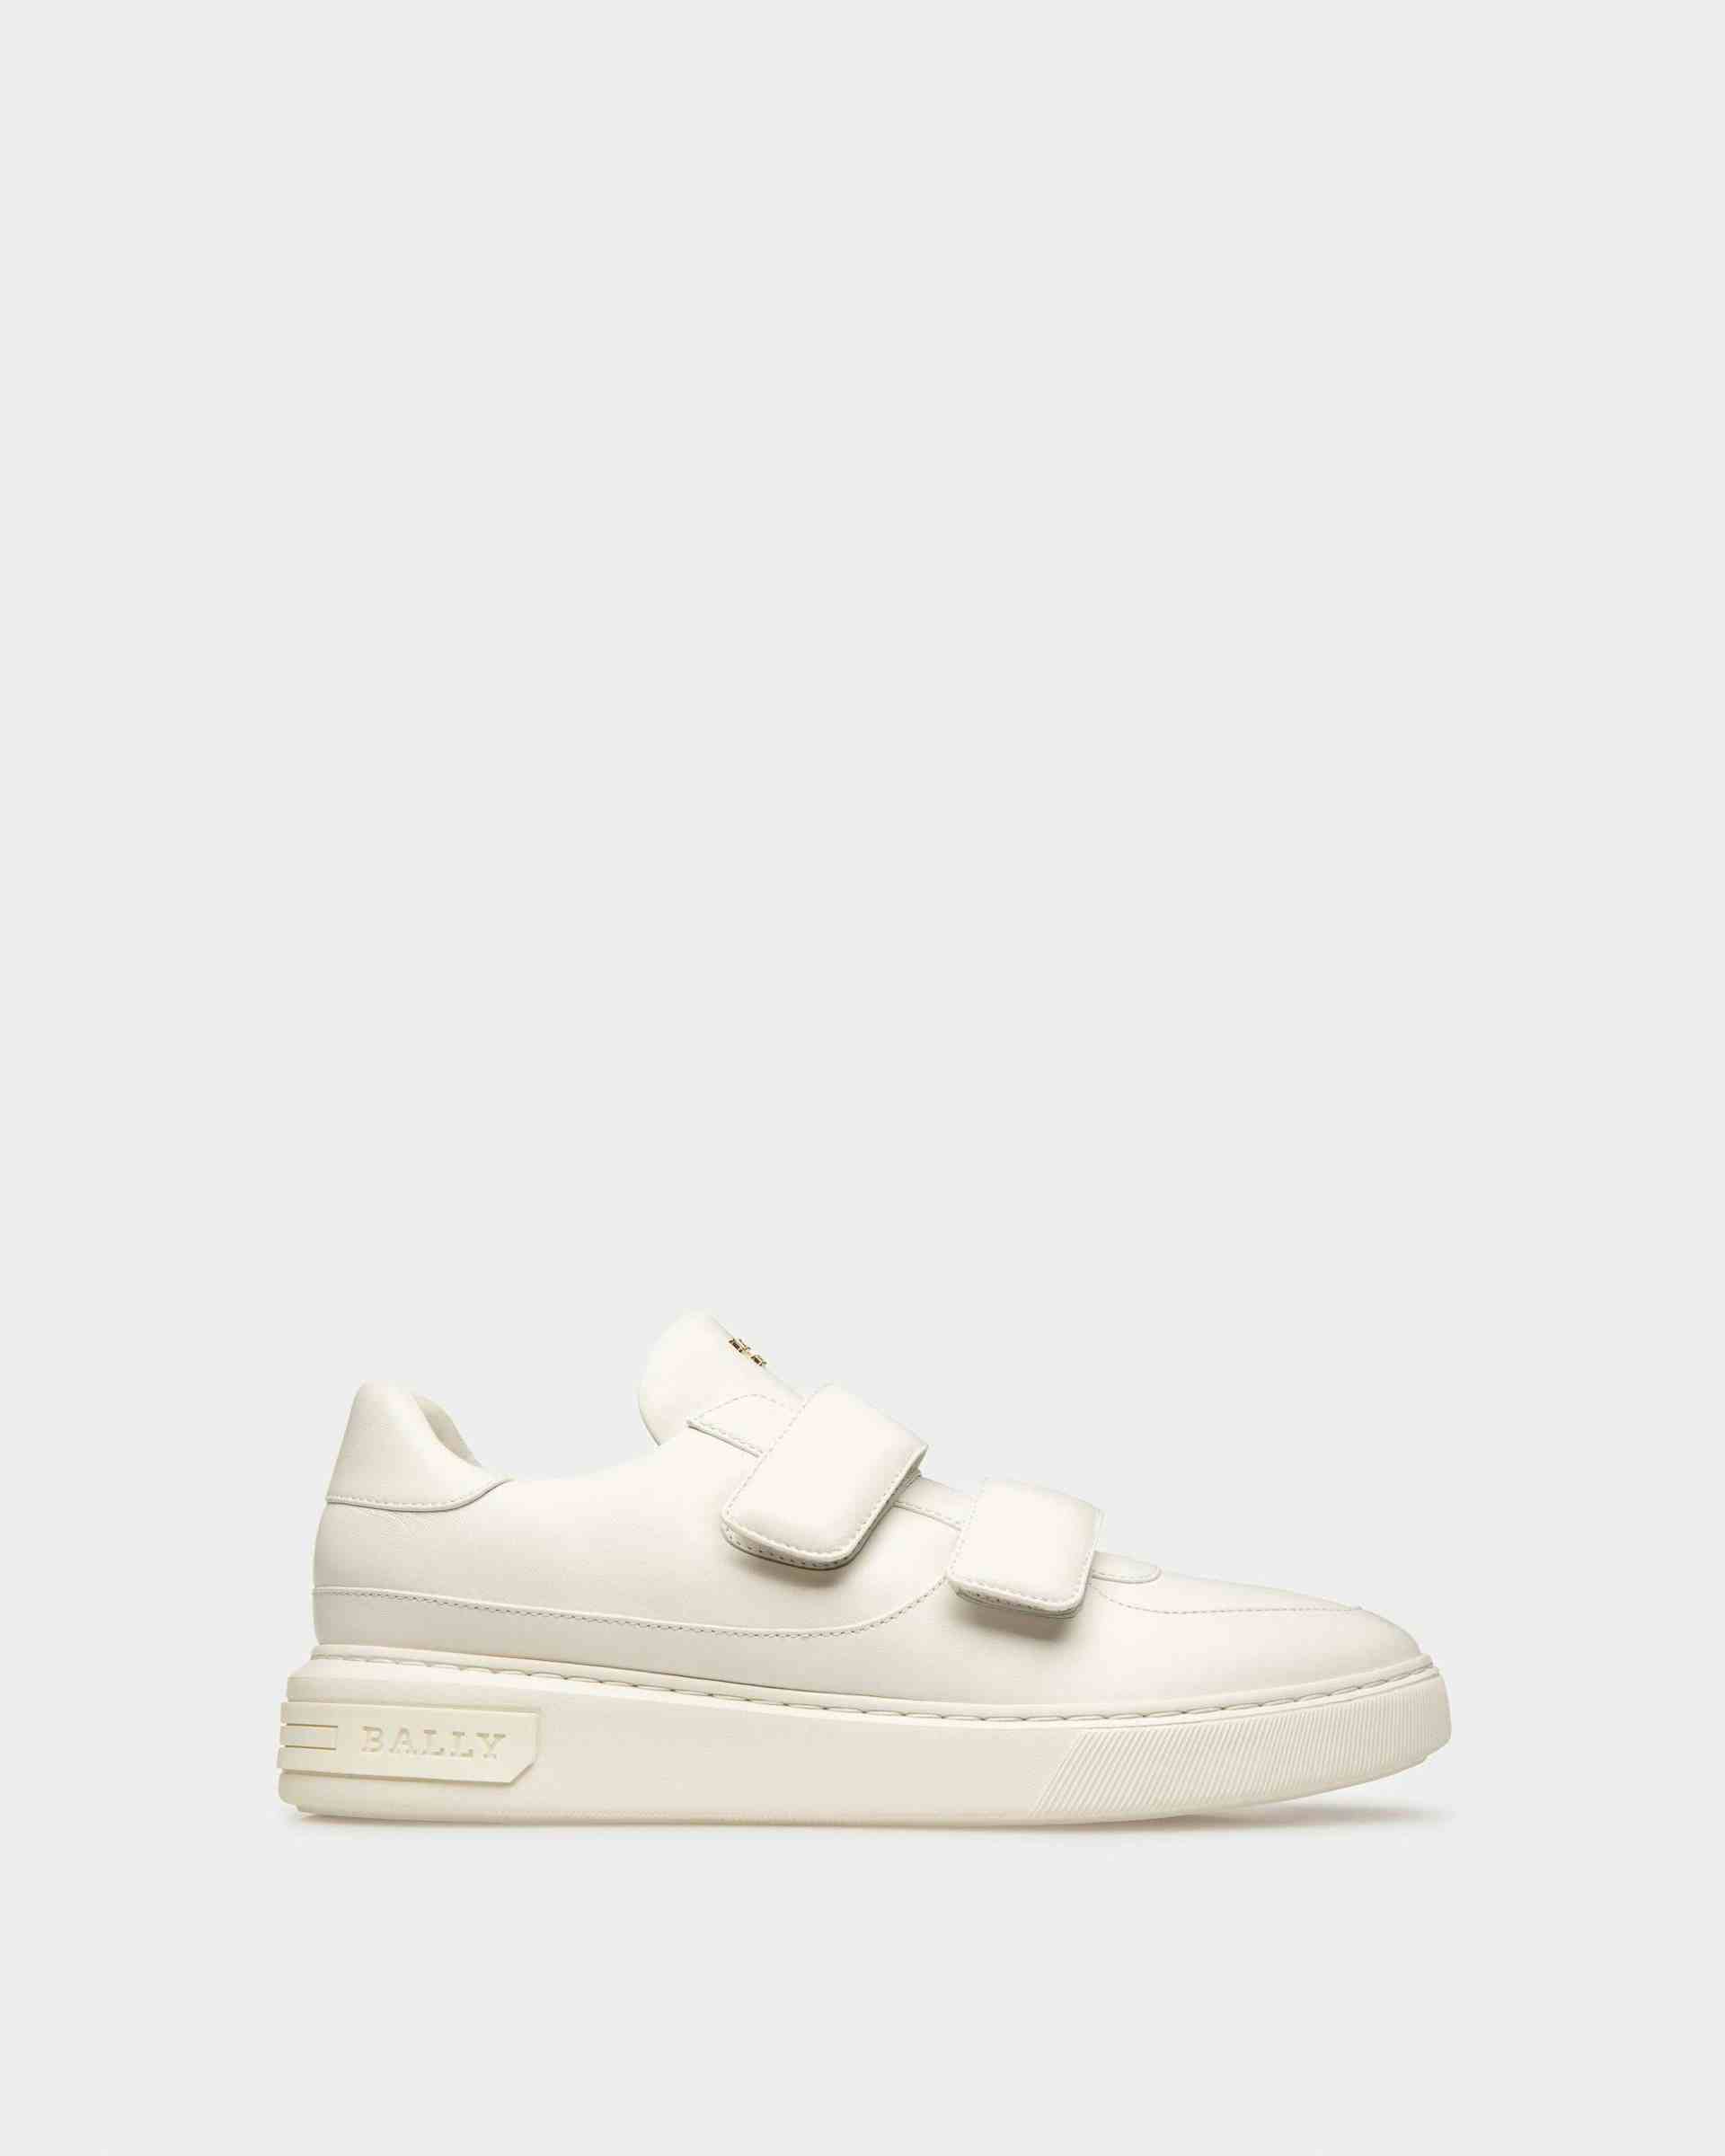 Maylor Leather Sneakers In White - Men's - Bally